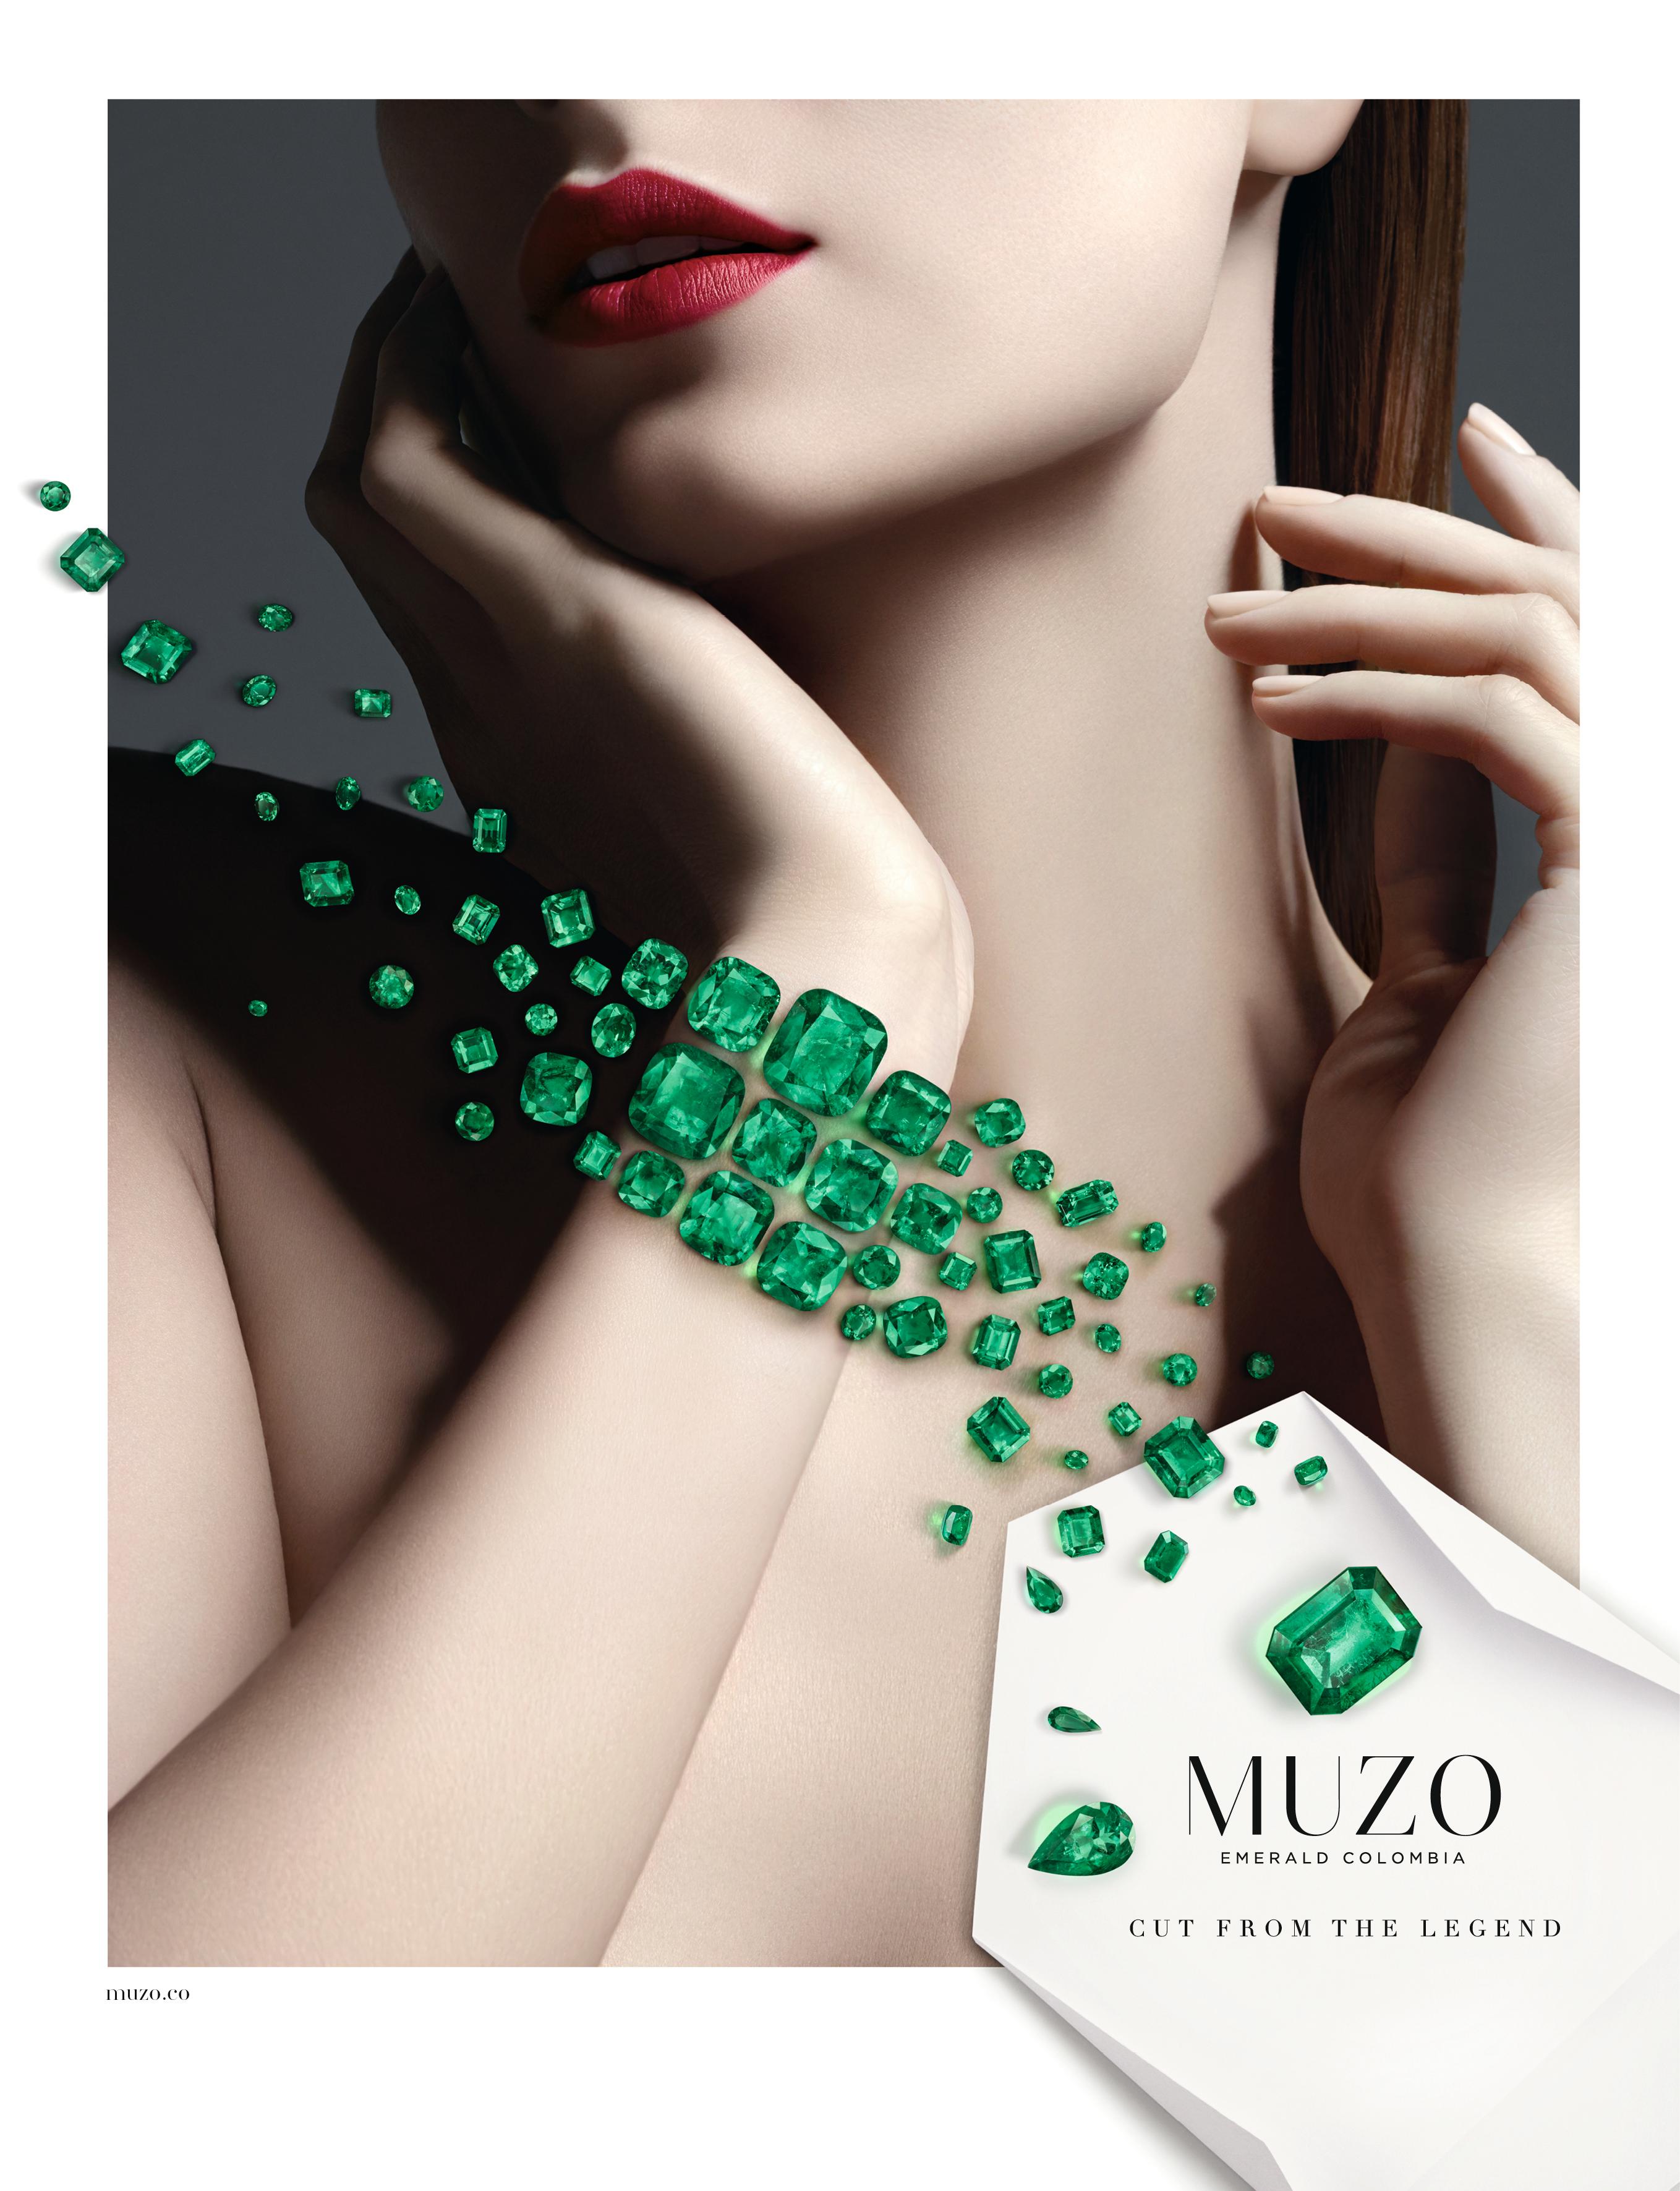 One of kind high jewelry choker featuring Muzo Colombian emeralds weighing 228.69 carats and scattered round brilliant diamonds weighing 12.47 carats.

Muzo Emerald Colombia Heritage Muisca Necklace set with 228.68 carats Emerald.

Named in honor of